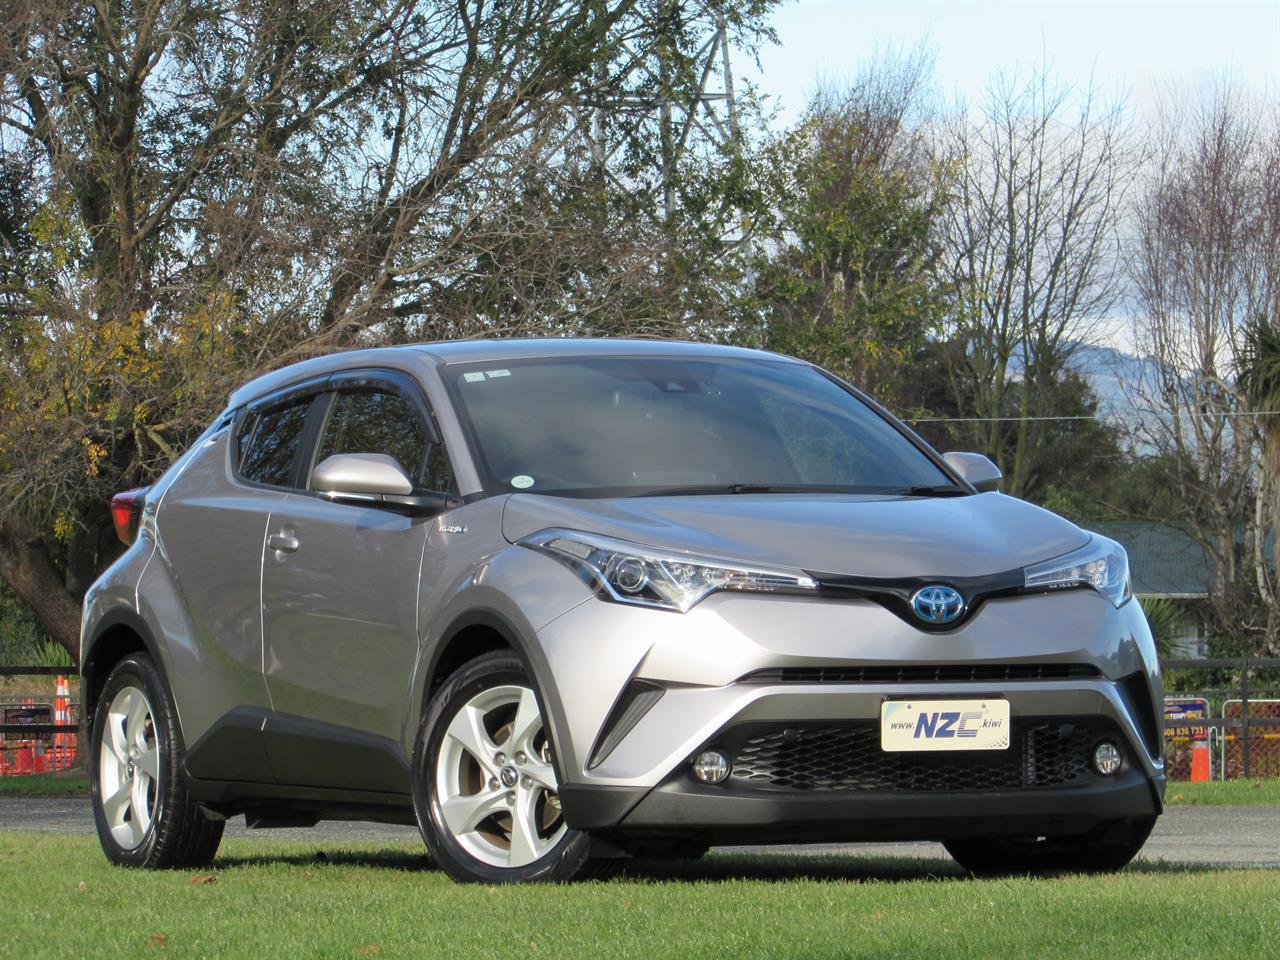 NZC best hot price for 2017 Toyota C-HR in Christchurch